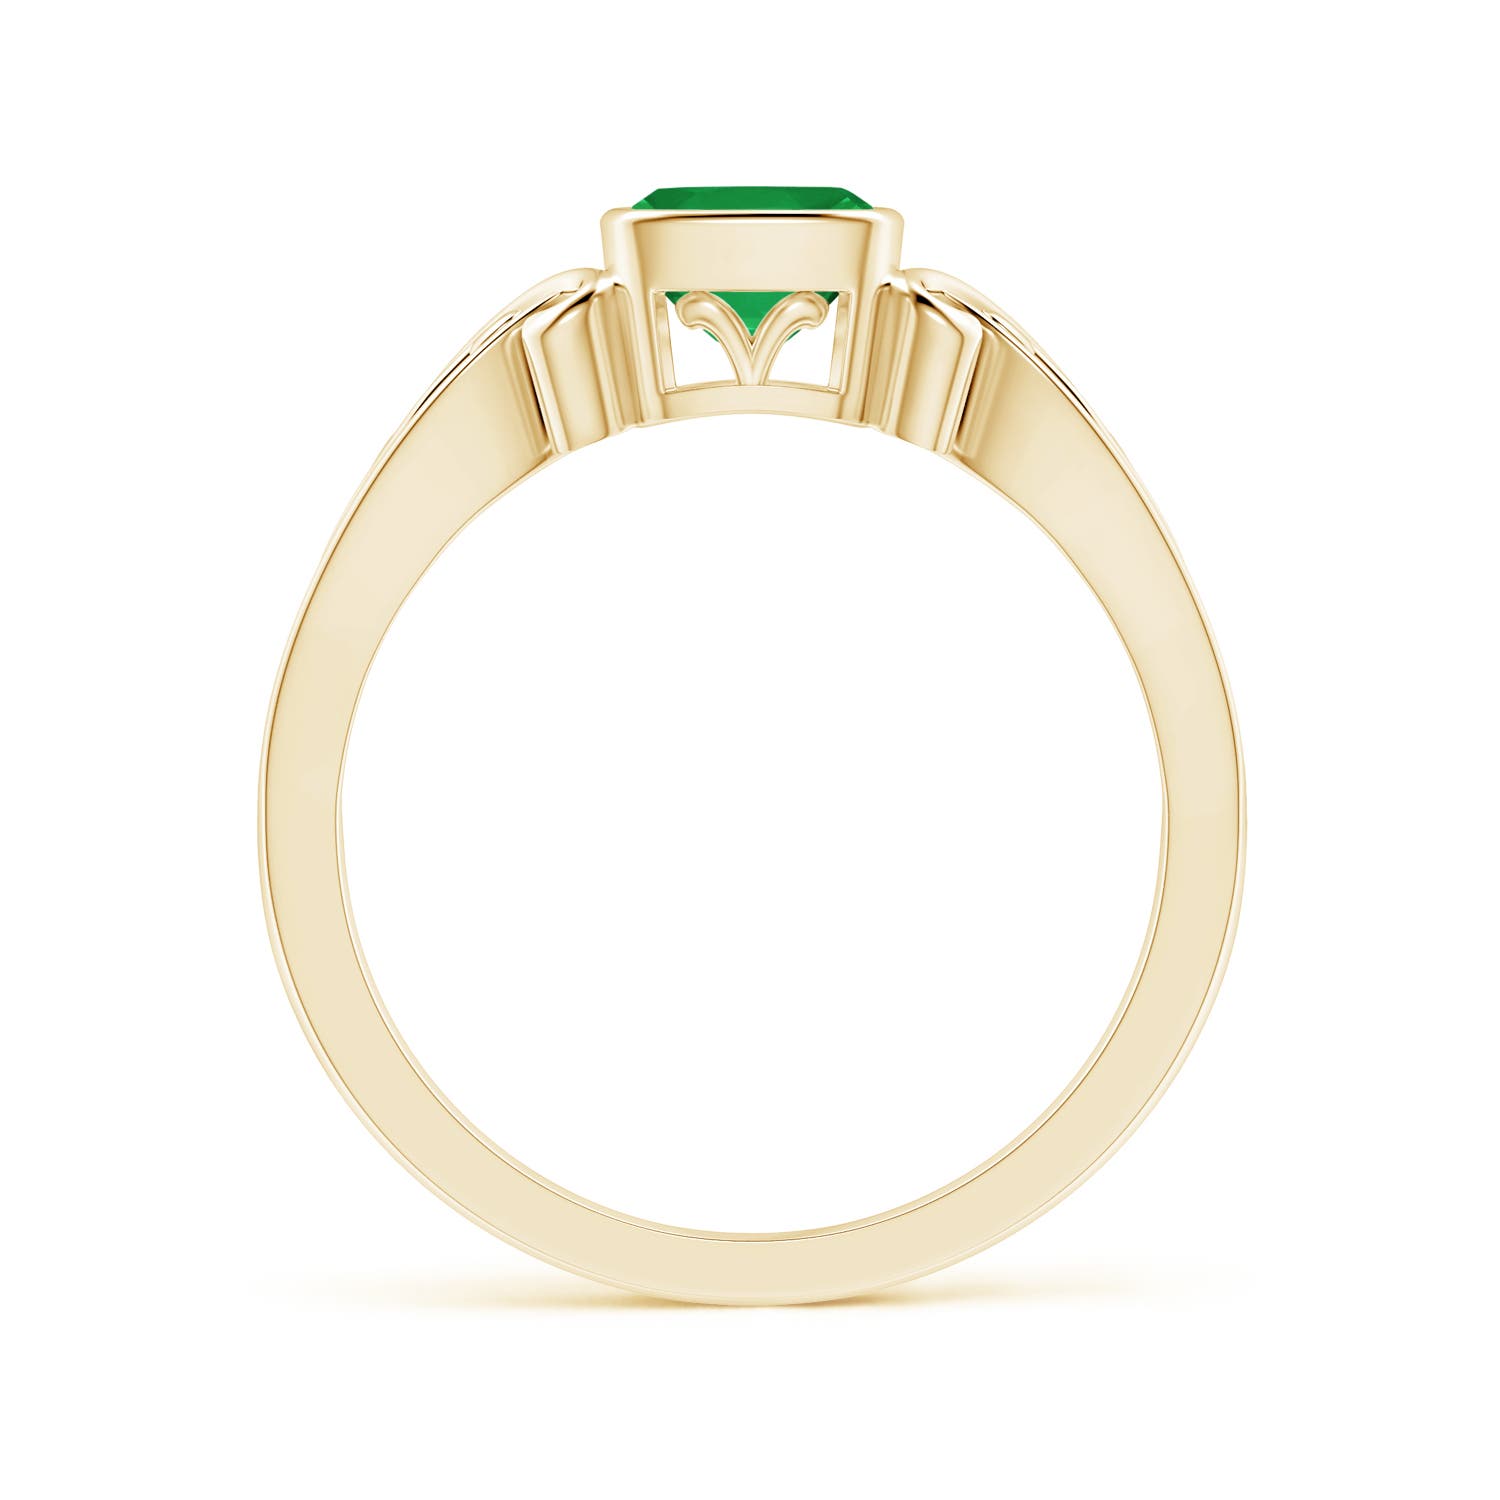 A - Emerald / 0.55 CT / 14 KT Yellow Gold